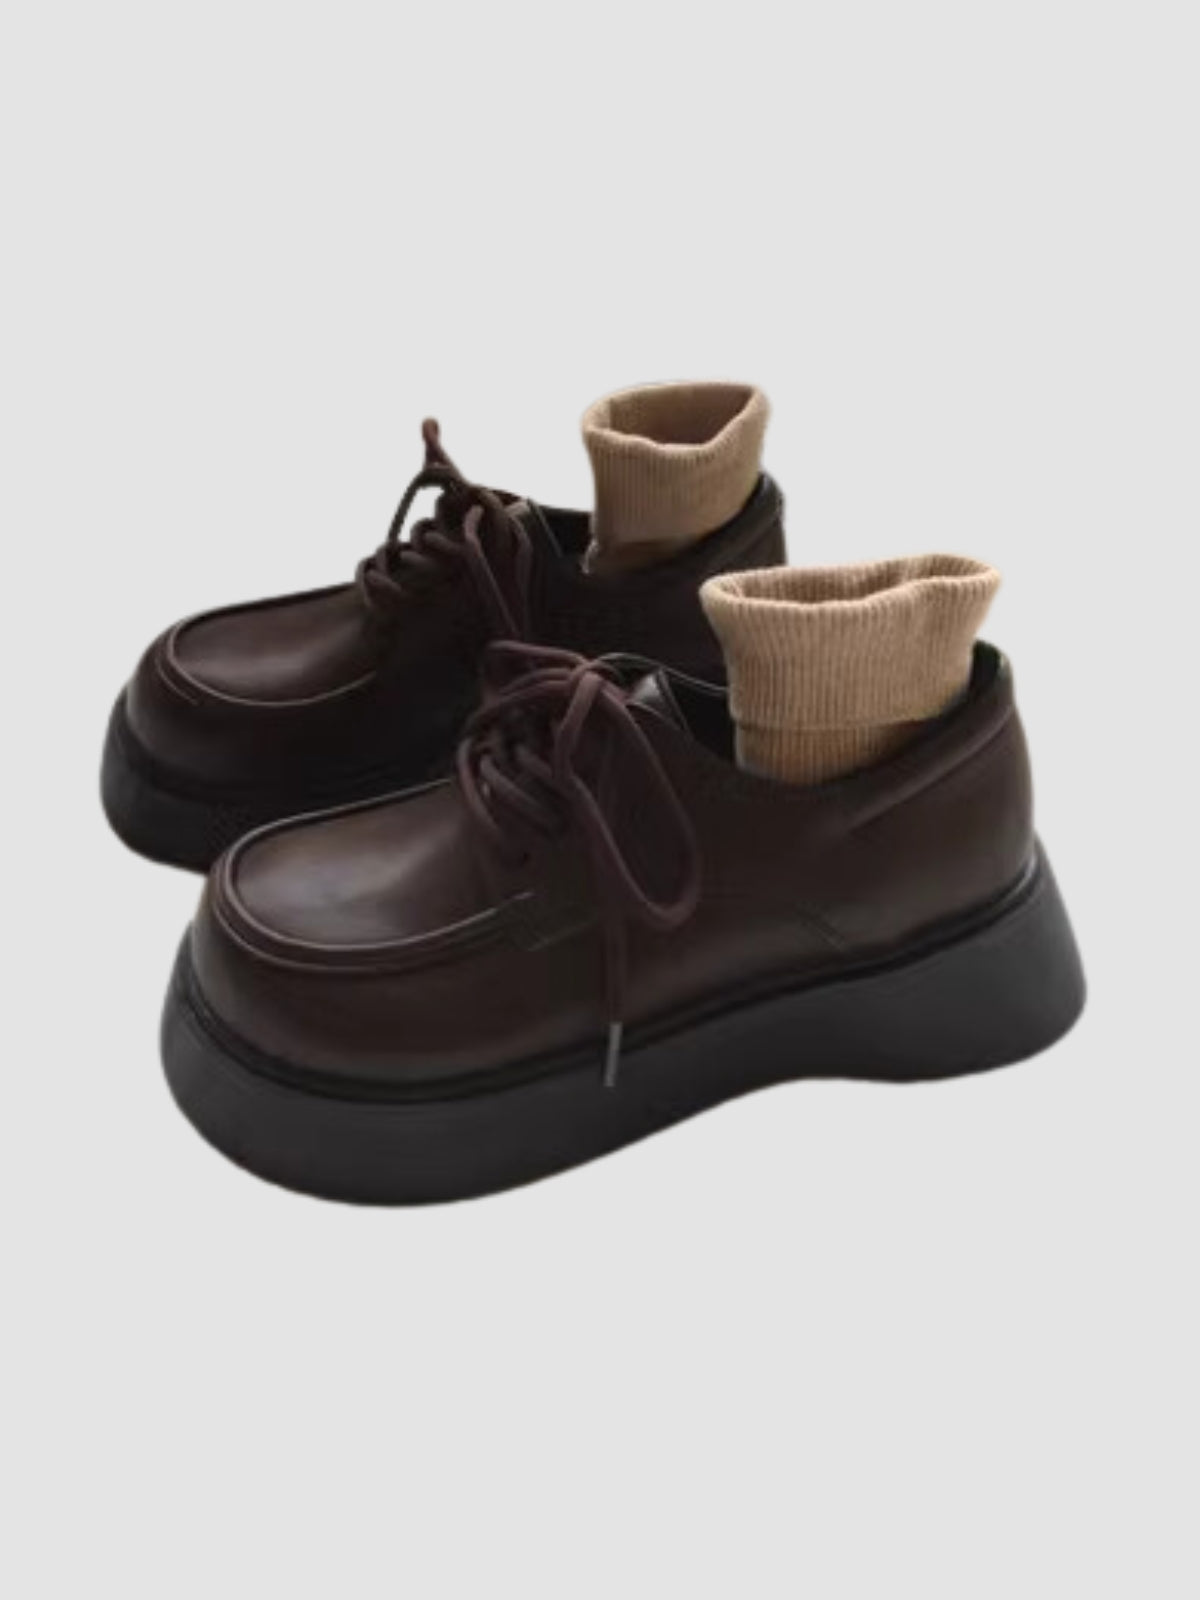 WLS Thick Soled Retro Chic Leather Shoes